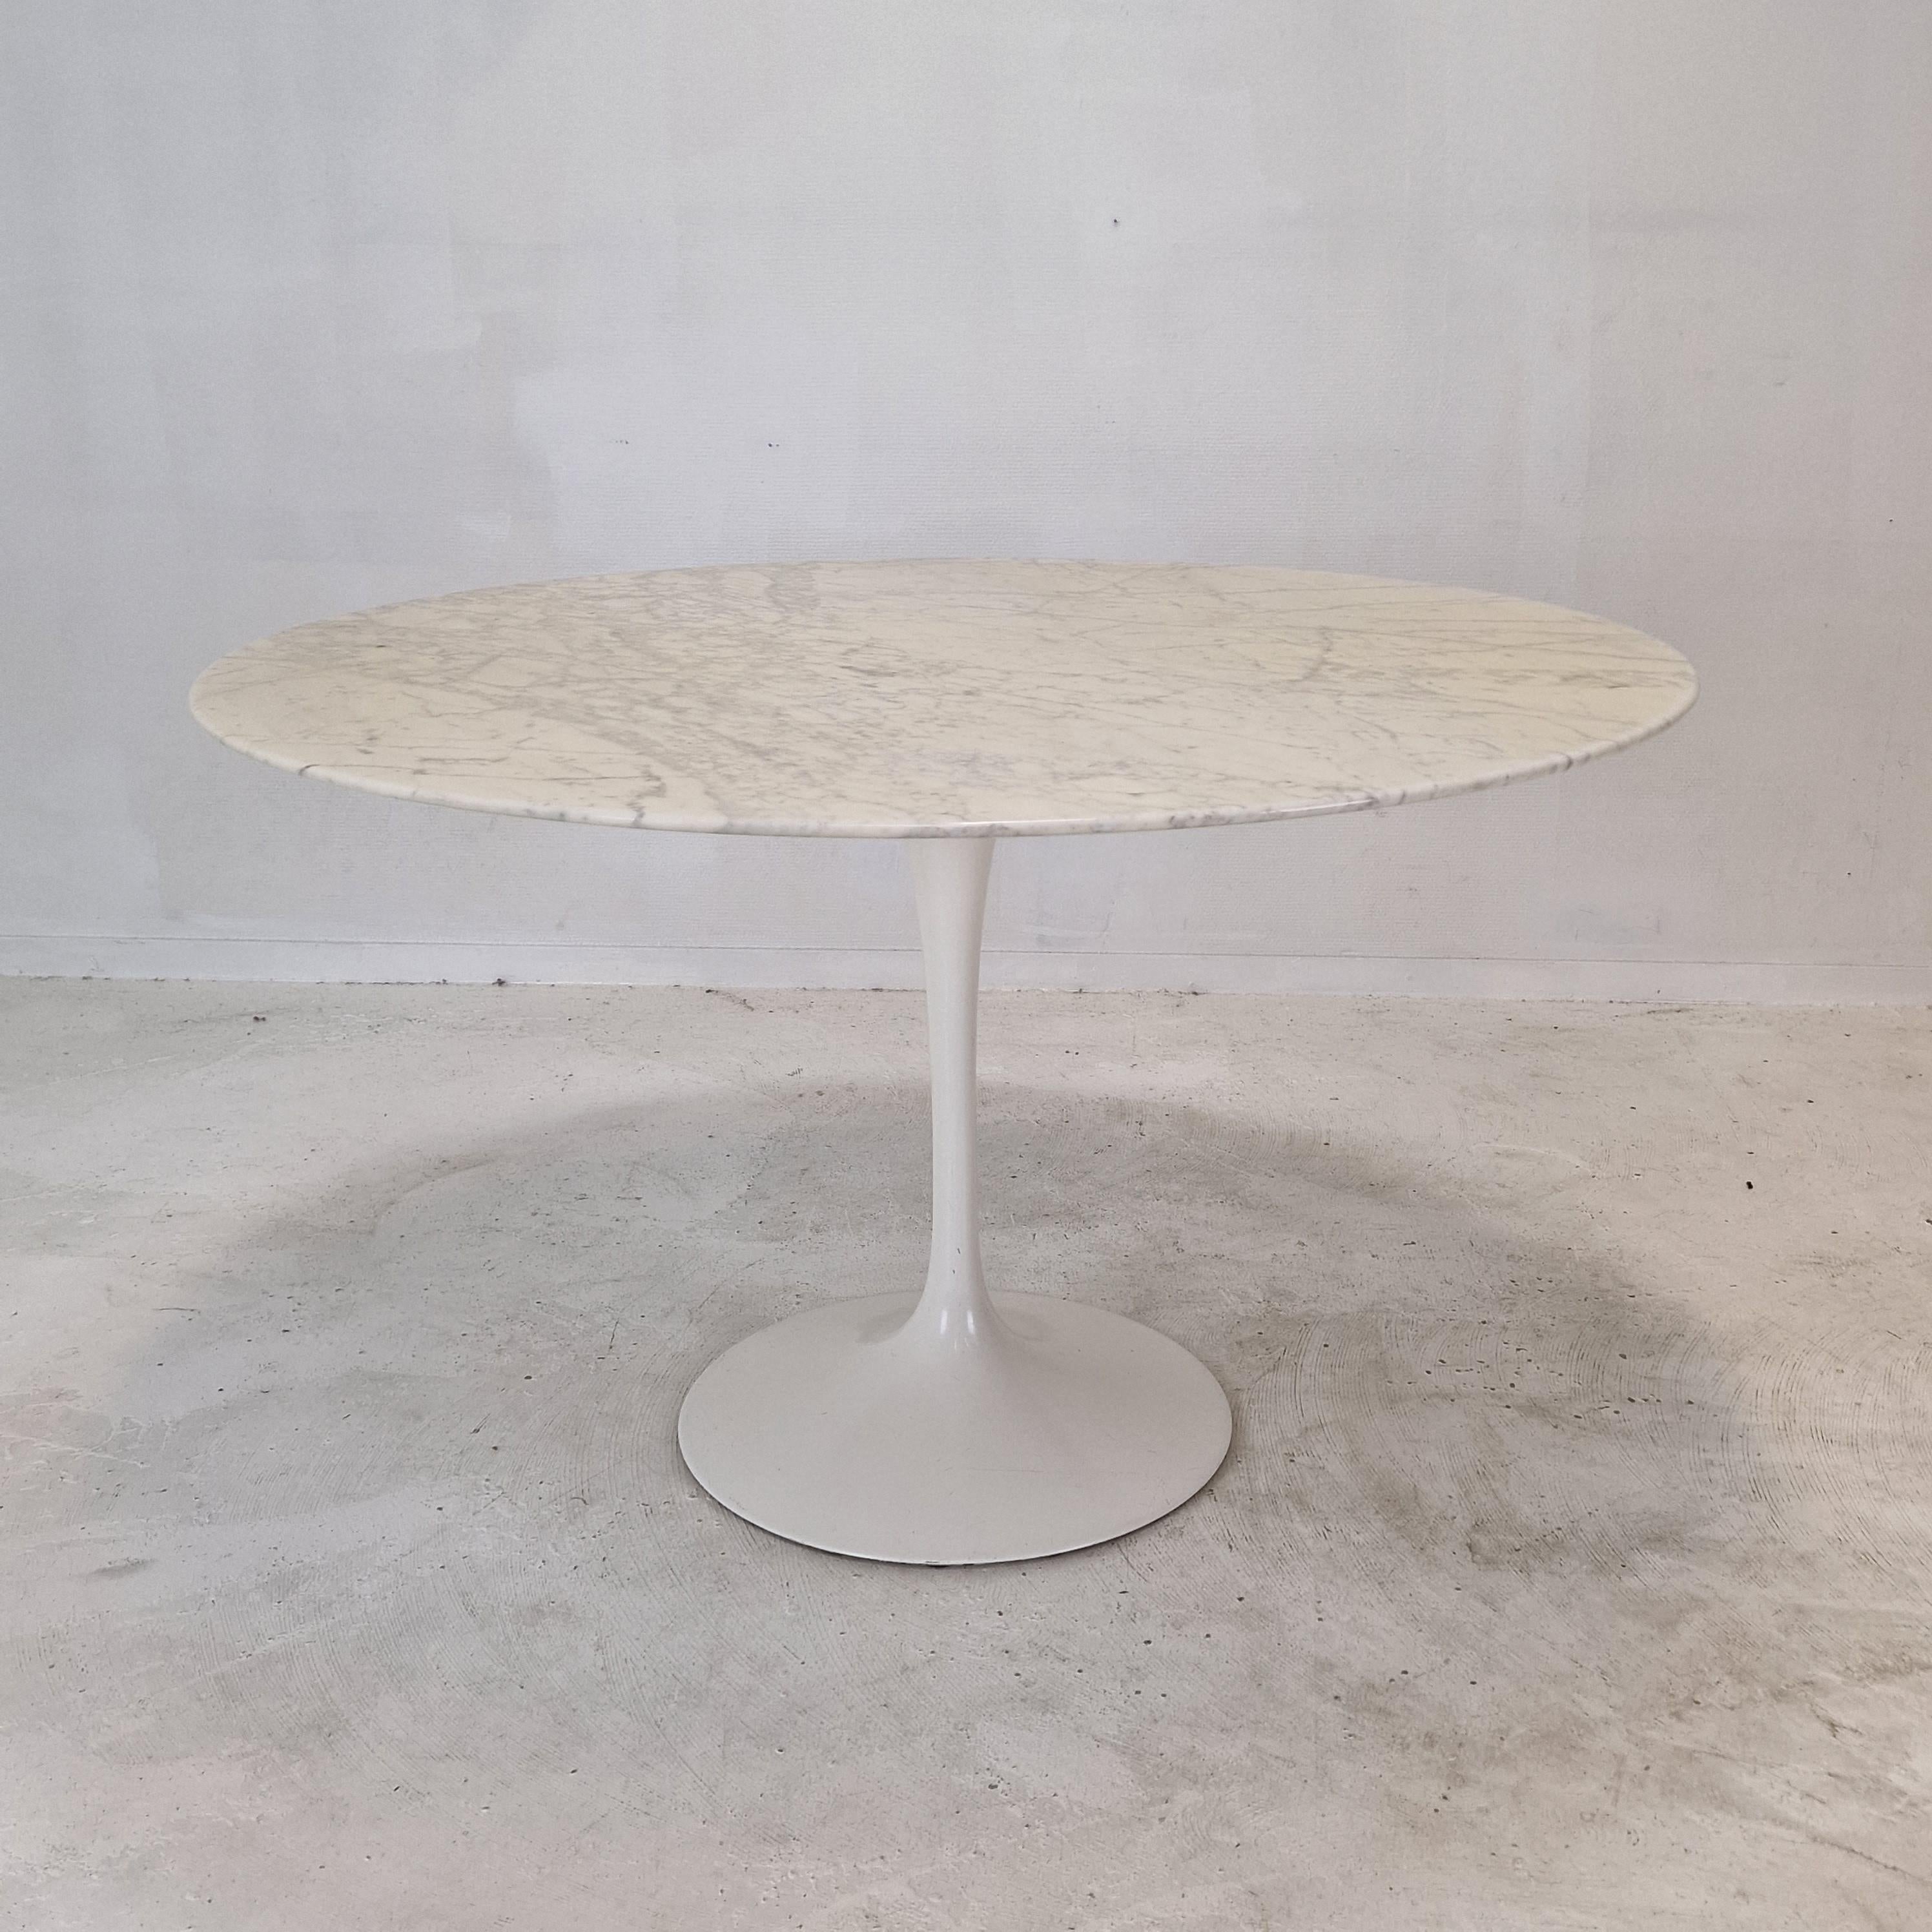 Hand-Crafted Knoll Marble Dining Table With 5 Chairs by Eero Saarinen, 1960s For Sale